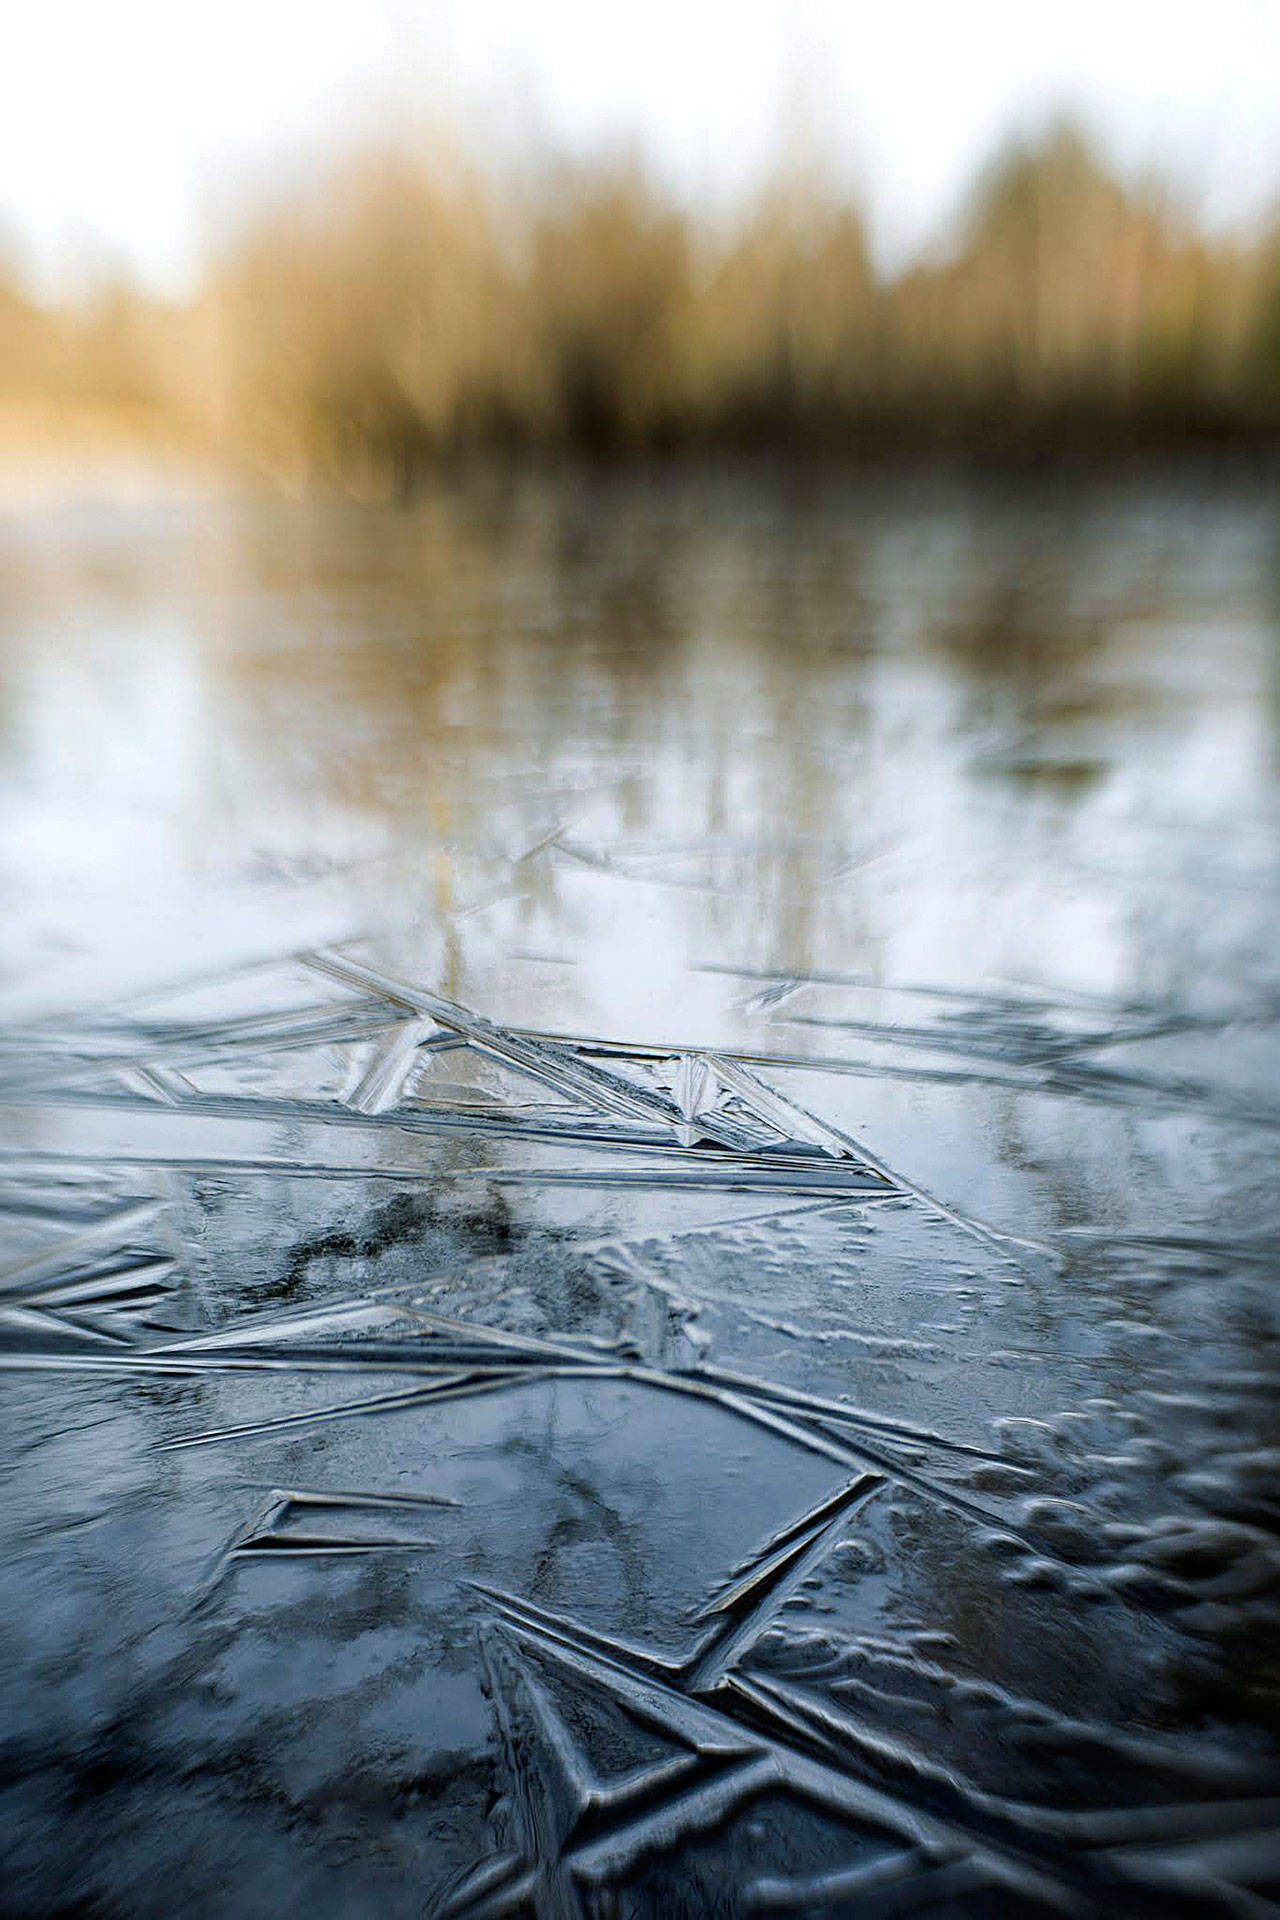 “Frozen Memory” by Mandi May. (Image courtesy of the BPA Gallery)